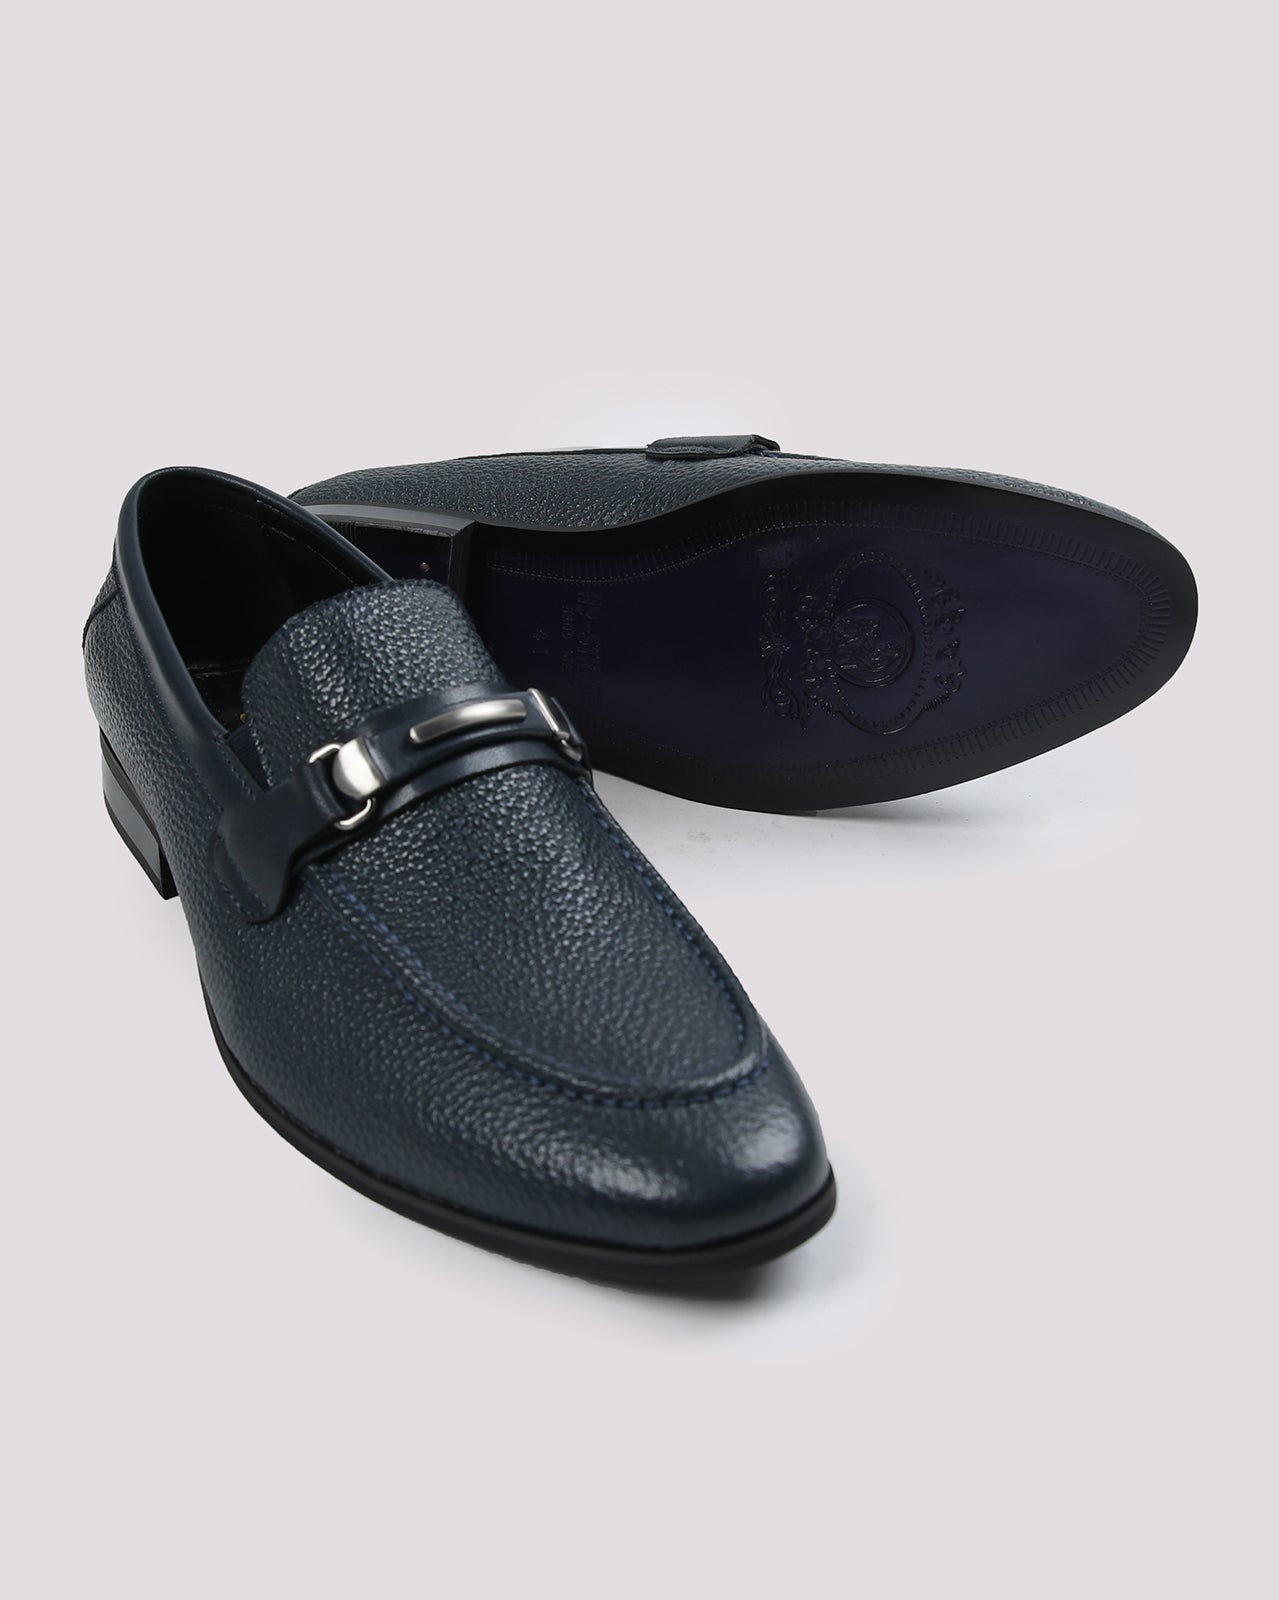 Buckle Detail Loafer Shoes